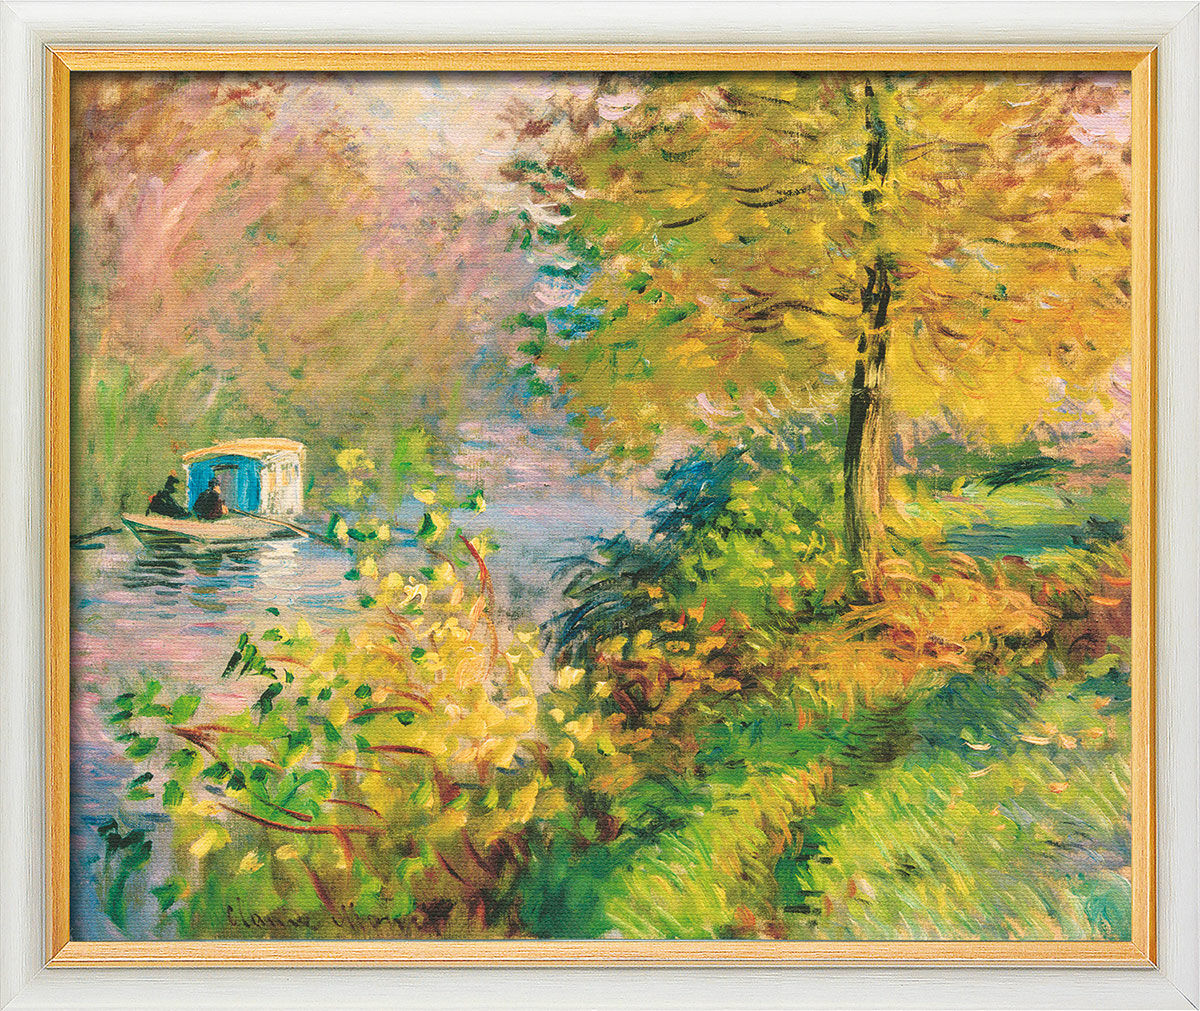 Picture "The Studio Boat" (1876), framed by Claude Monet